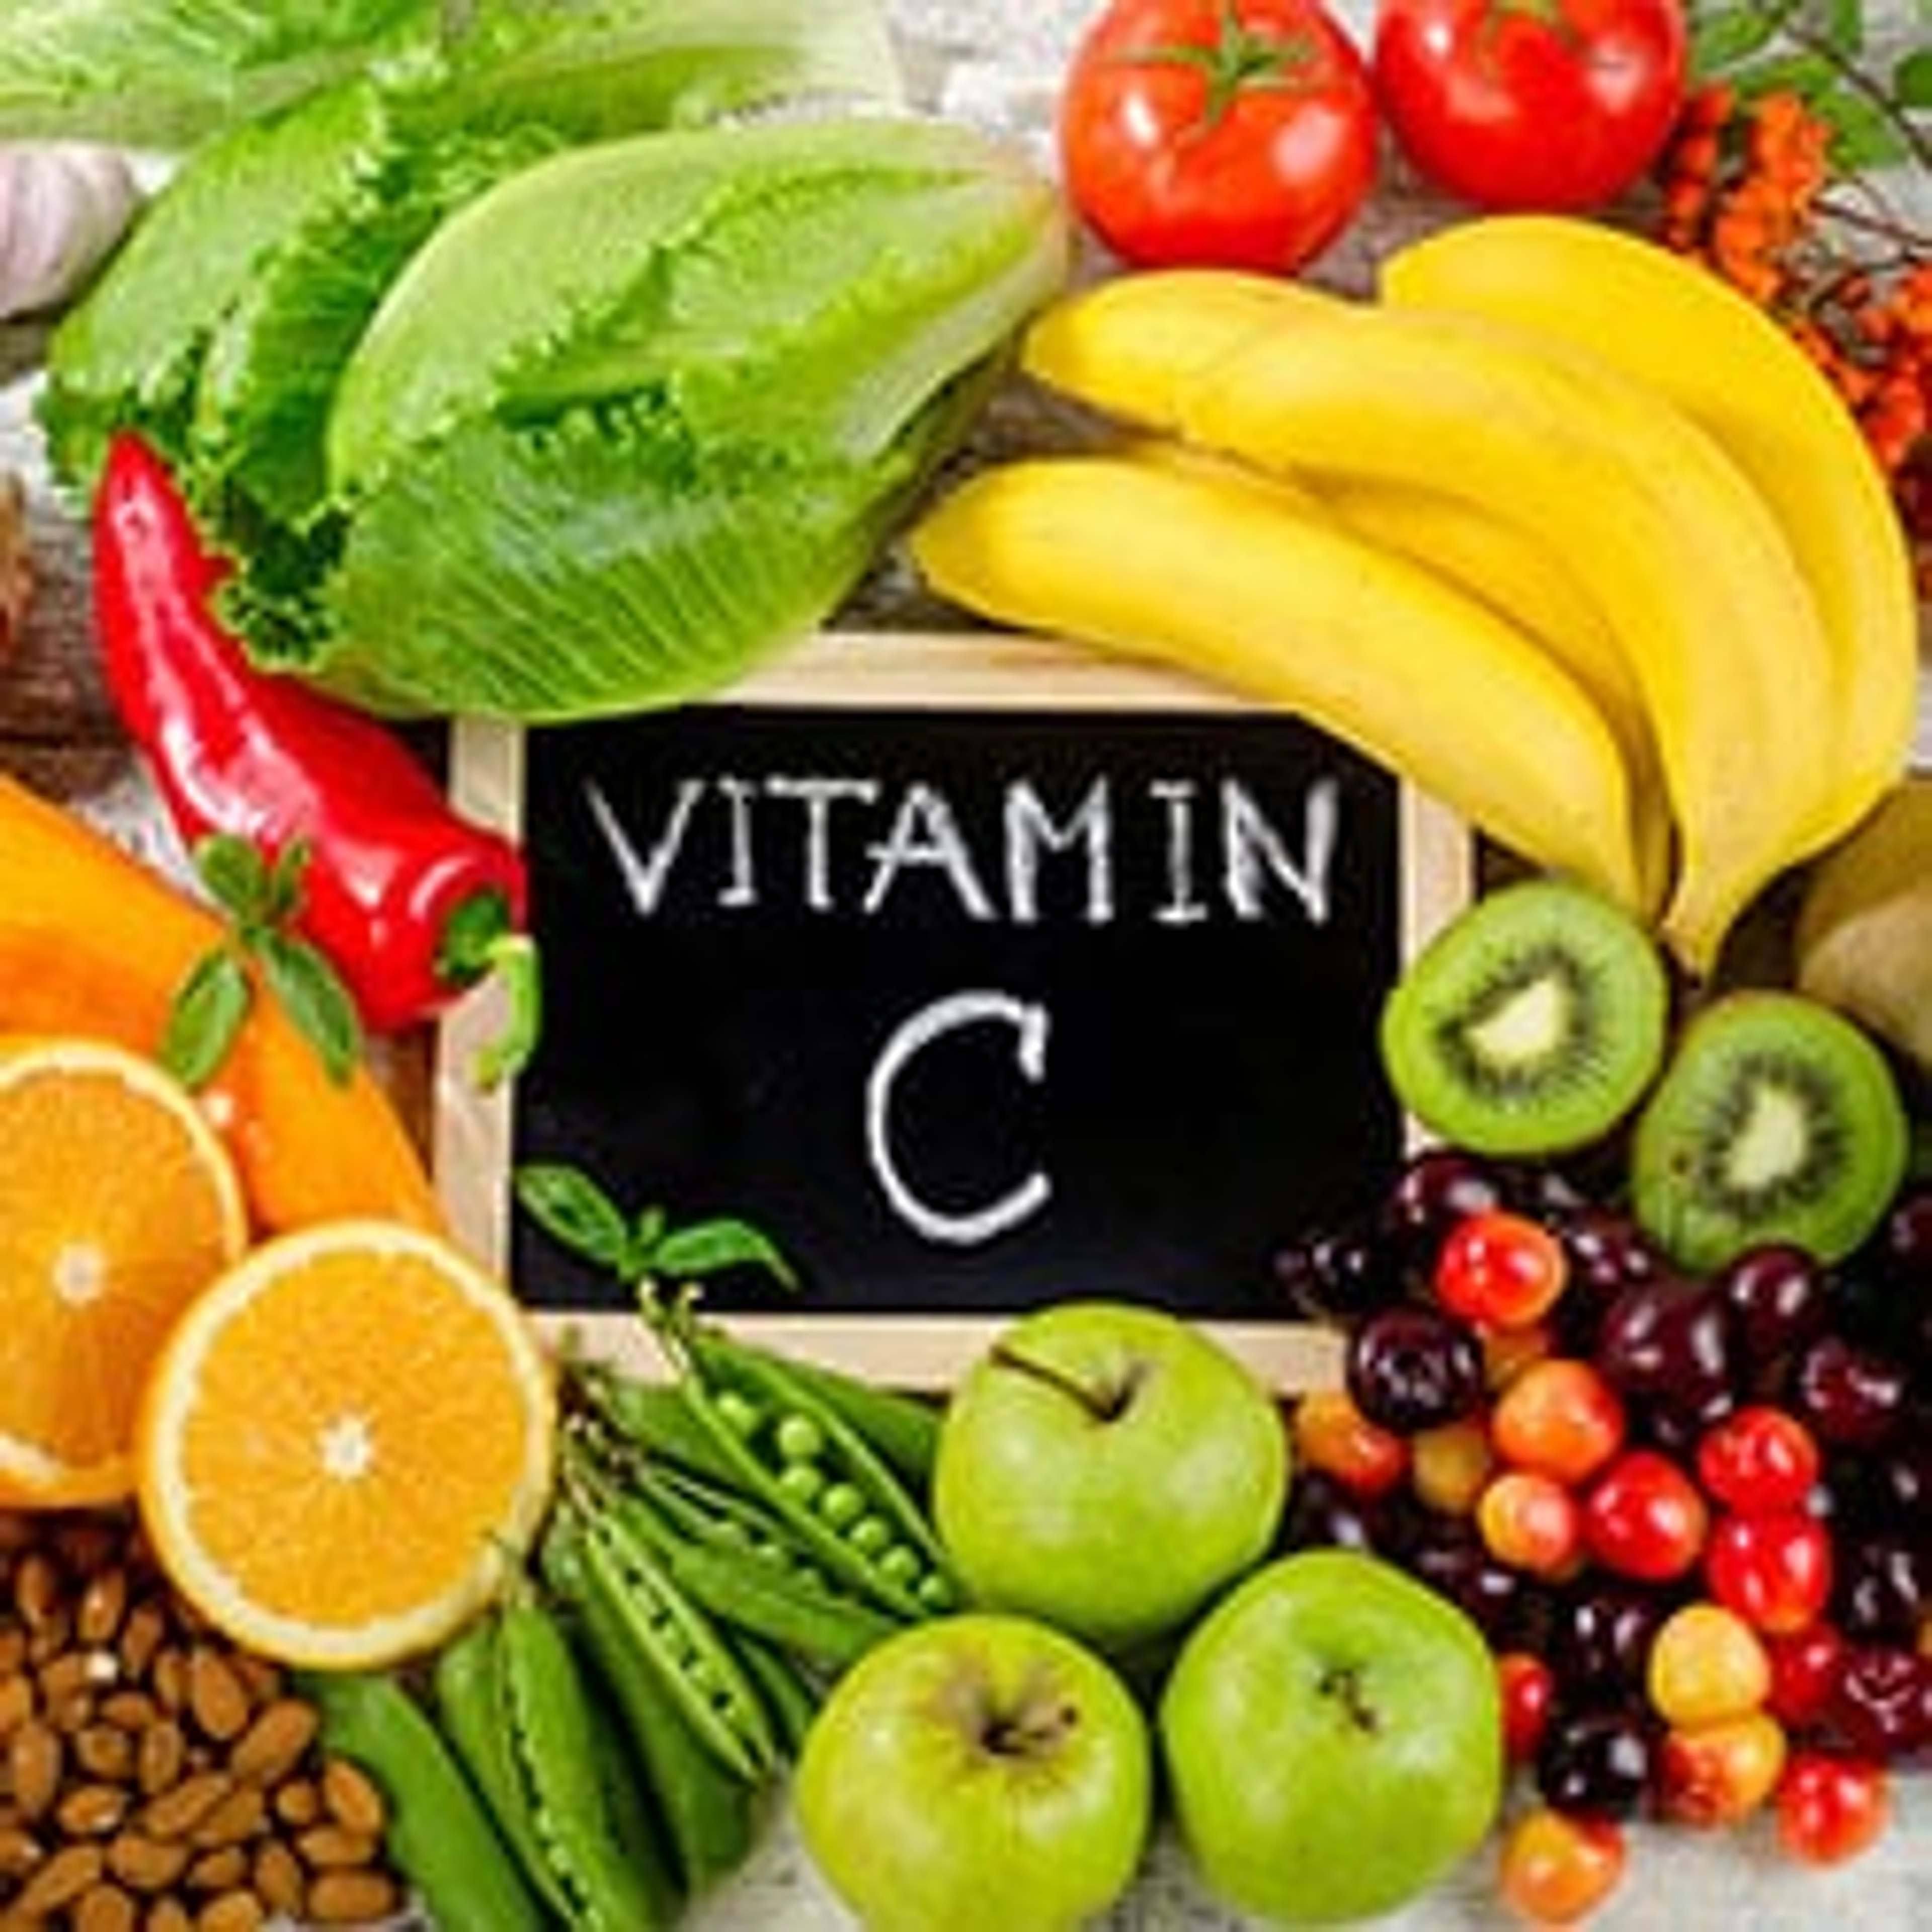 Vitamin C - Doesn't just strengthen the immune system